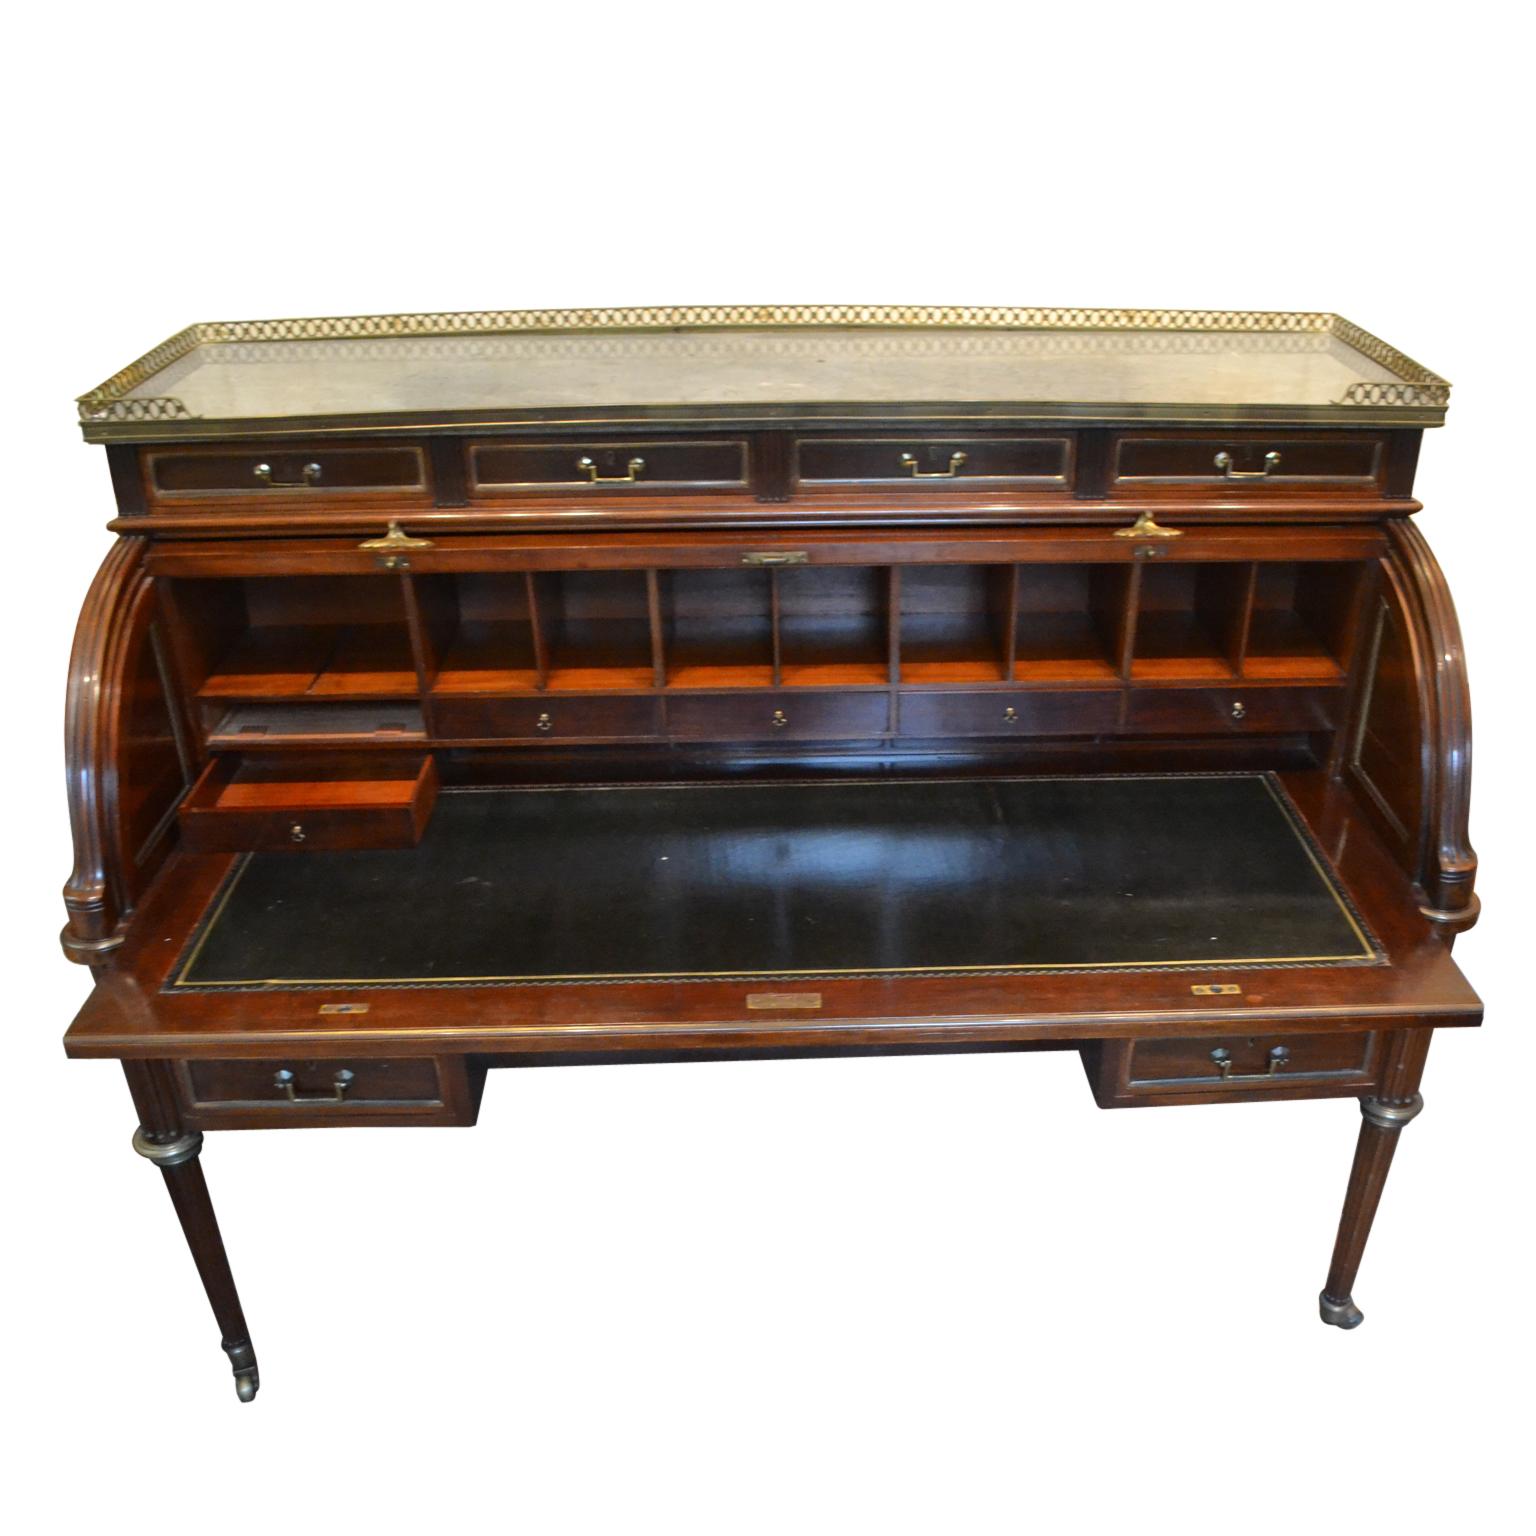 A palatial scale mahogany cylinder desk in the Louis XVI style; the superstructure with rectangular galleried bleu turquin marble top over four frieze drawers, the paneled cylinder front opening to reveal a fitted interior with leather lined writing